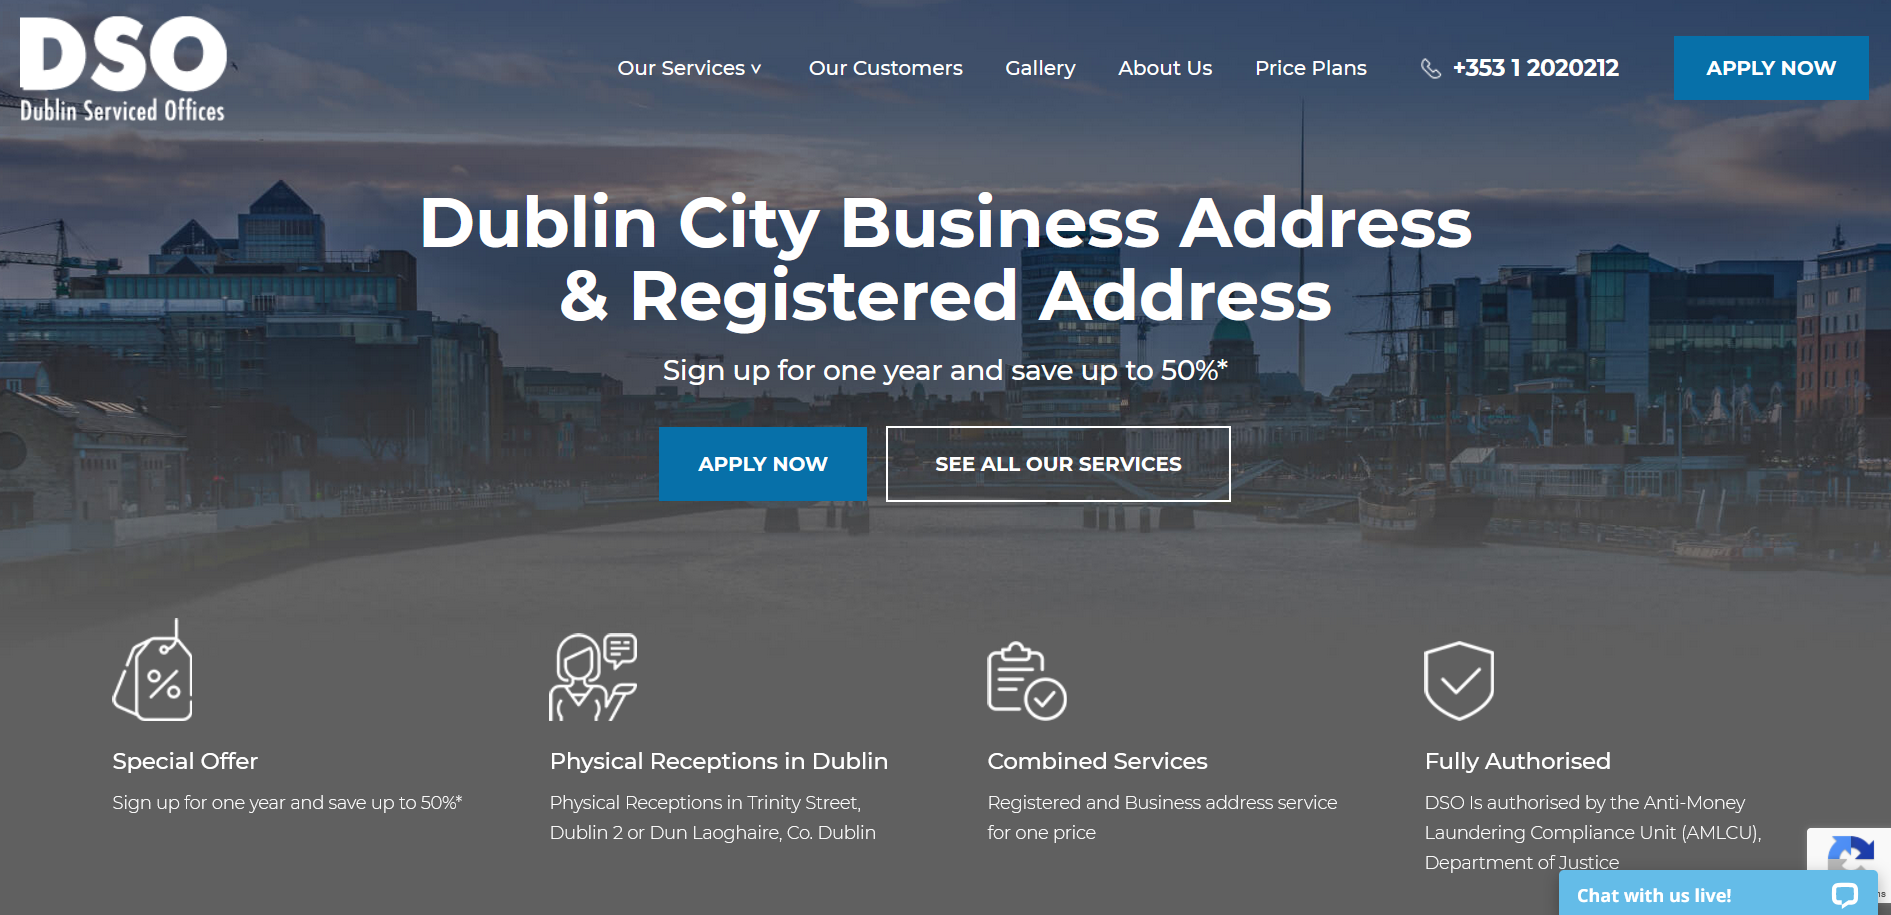 Dublin Serviced Offices - DSO